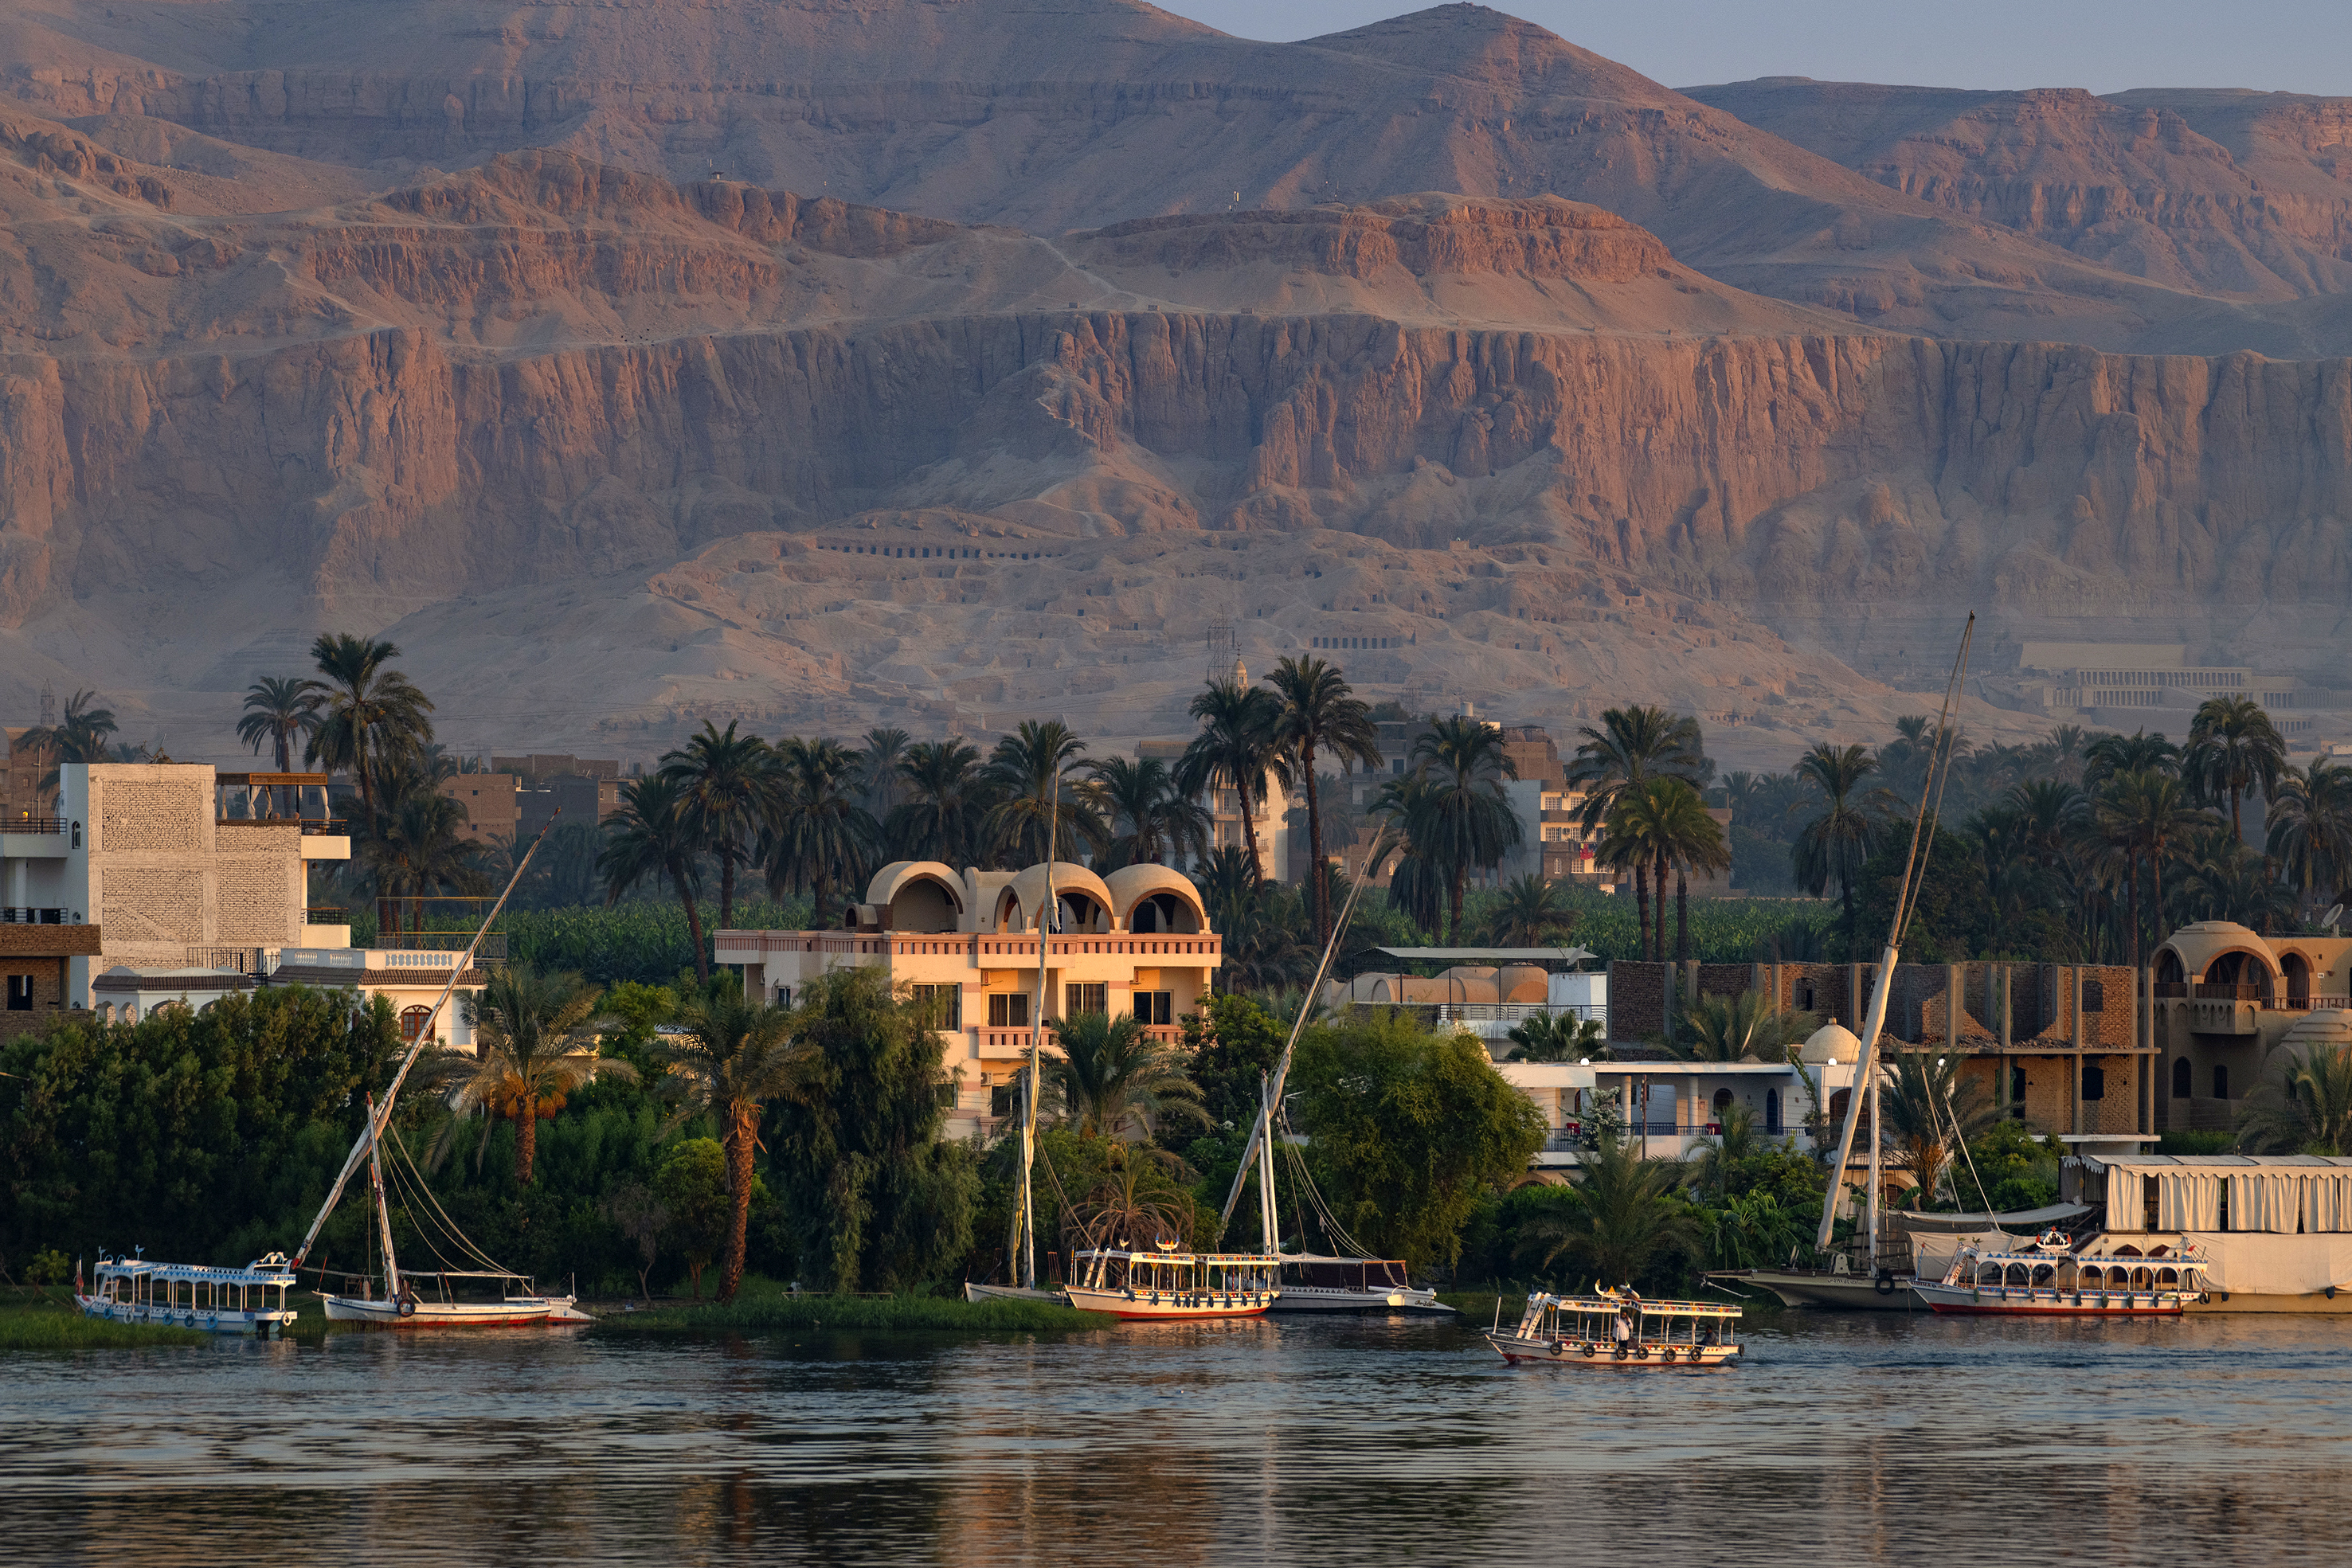 View of the Nile at Luxor. Photo by Scott Bennett